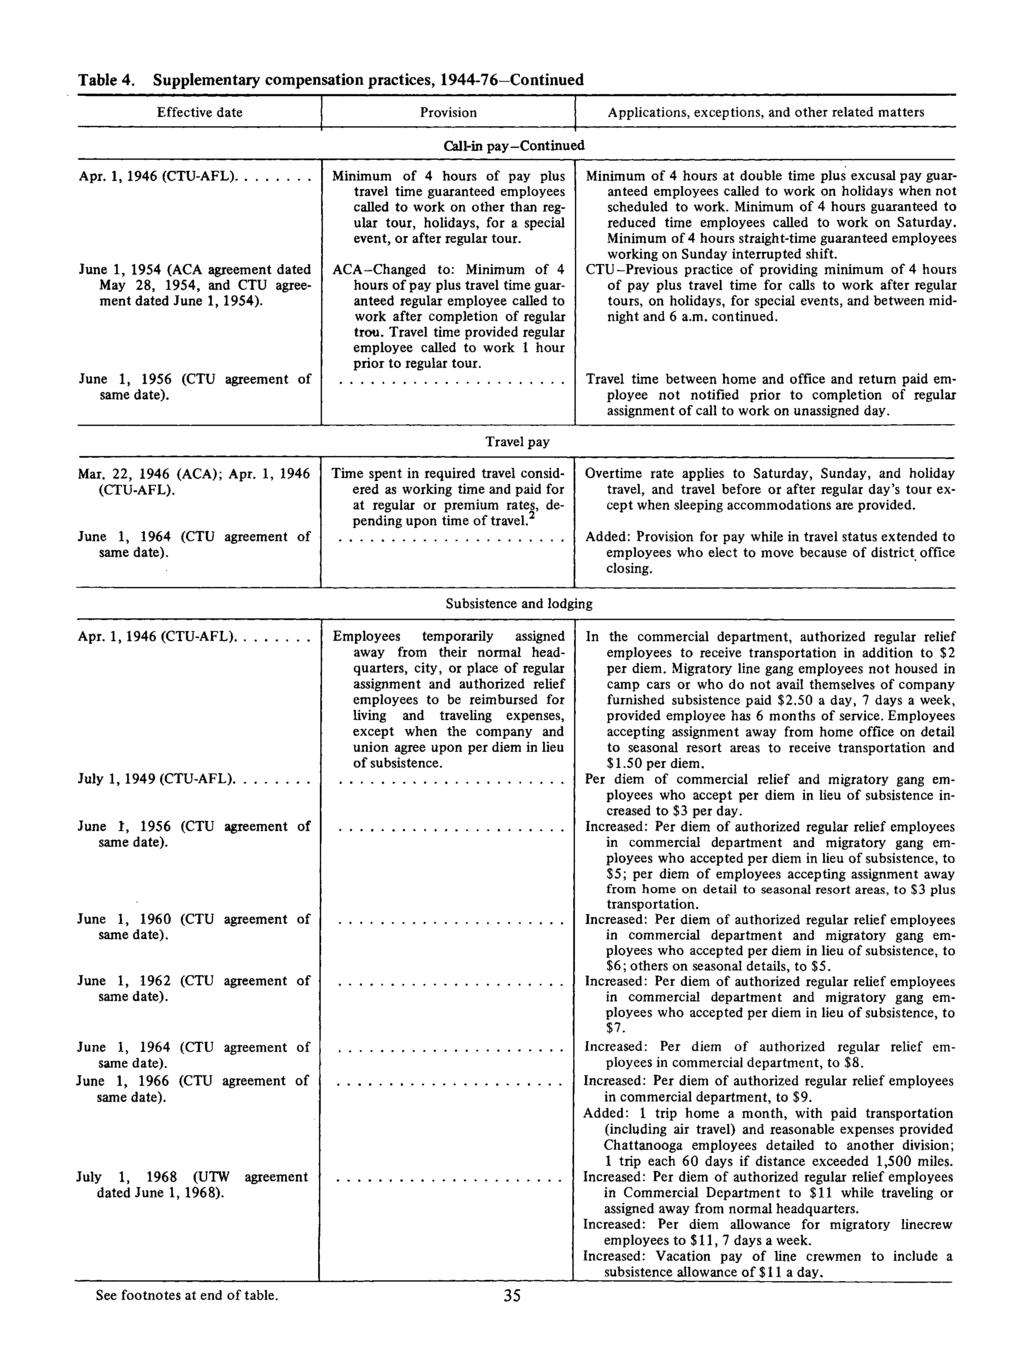 Table 4. Supplementary compensation practices, 1944-76 Continued Effective date Provision Applications, exceptions, and other related matters Call-in pay-c ontinu >d Apr. 1, 1946 (CTU-AFL).